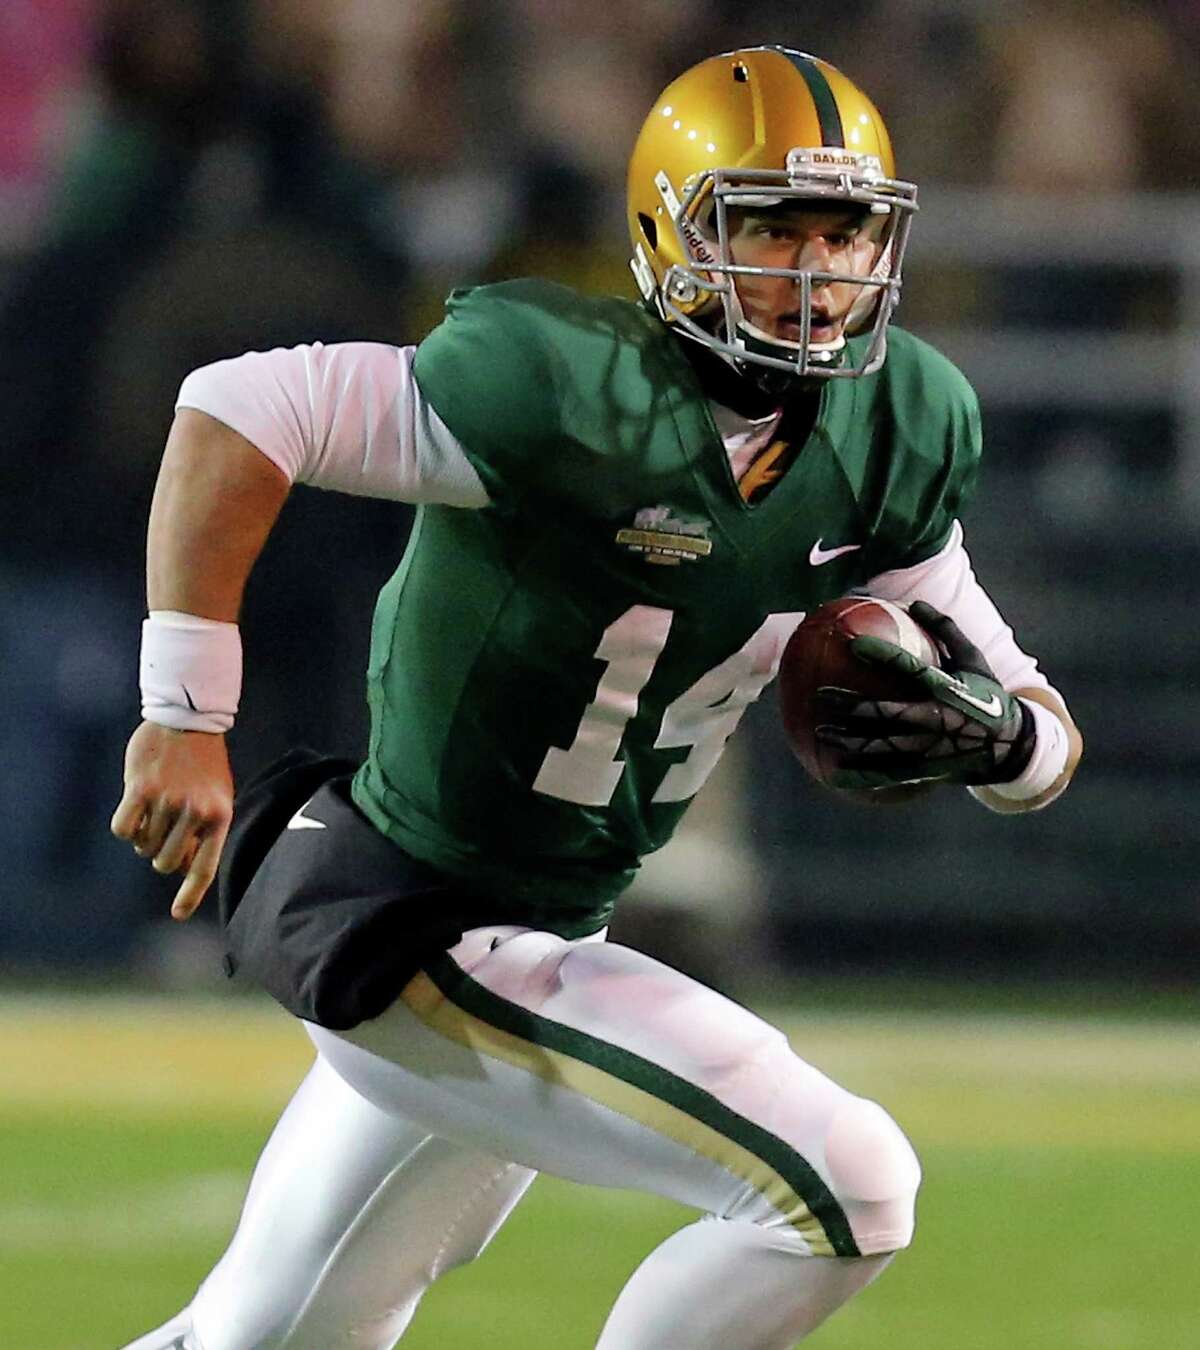 A look at the Express-News college football All-Texas superlatives and team for 2013: Offensive player of the year -- Bryce Petty, Baylor, 6-3, 230, Jr., Midlothian. Some might question why defending Heisman Trophy winner Johnny Manziel didn't win the award. Petty's statistics (3,844 passing yards, 30-to-2 touchdown/interception ratio and 11 rushing touchdowns) were equal. And the fact that Petty led Baylor to its first BCS bowl berth in history, while nailing down an 11-1 record serves as the tiebreaker.